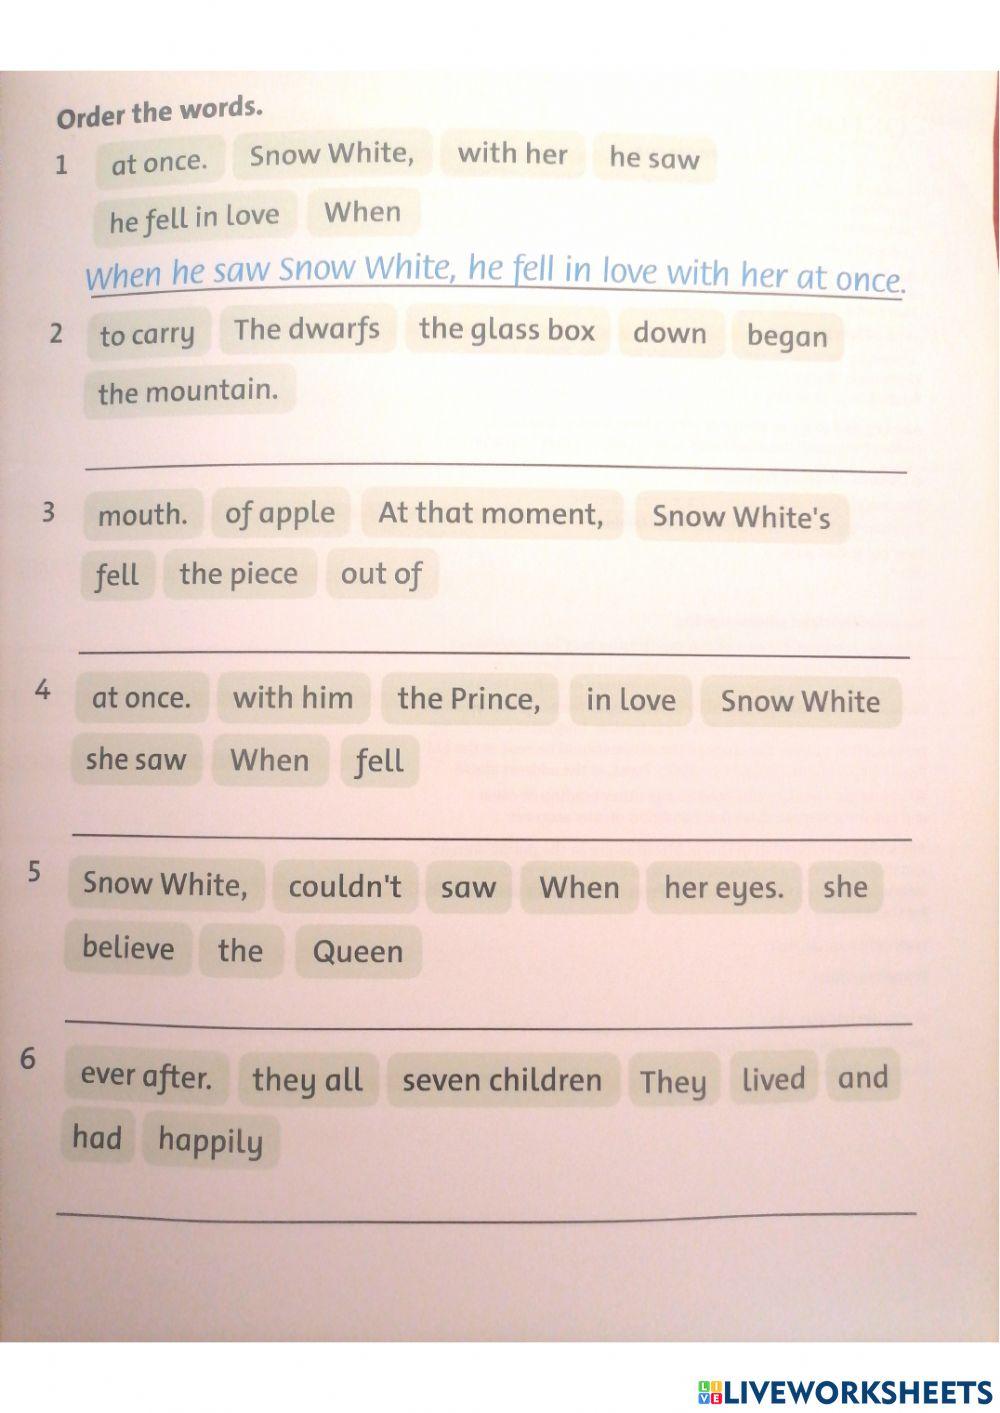 Snow White and the seven dwarfs part 7 Worksheet